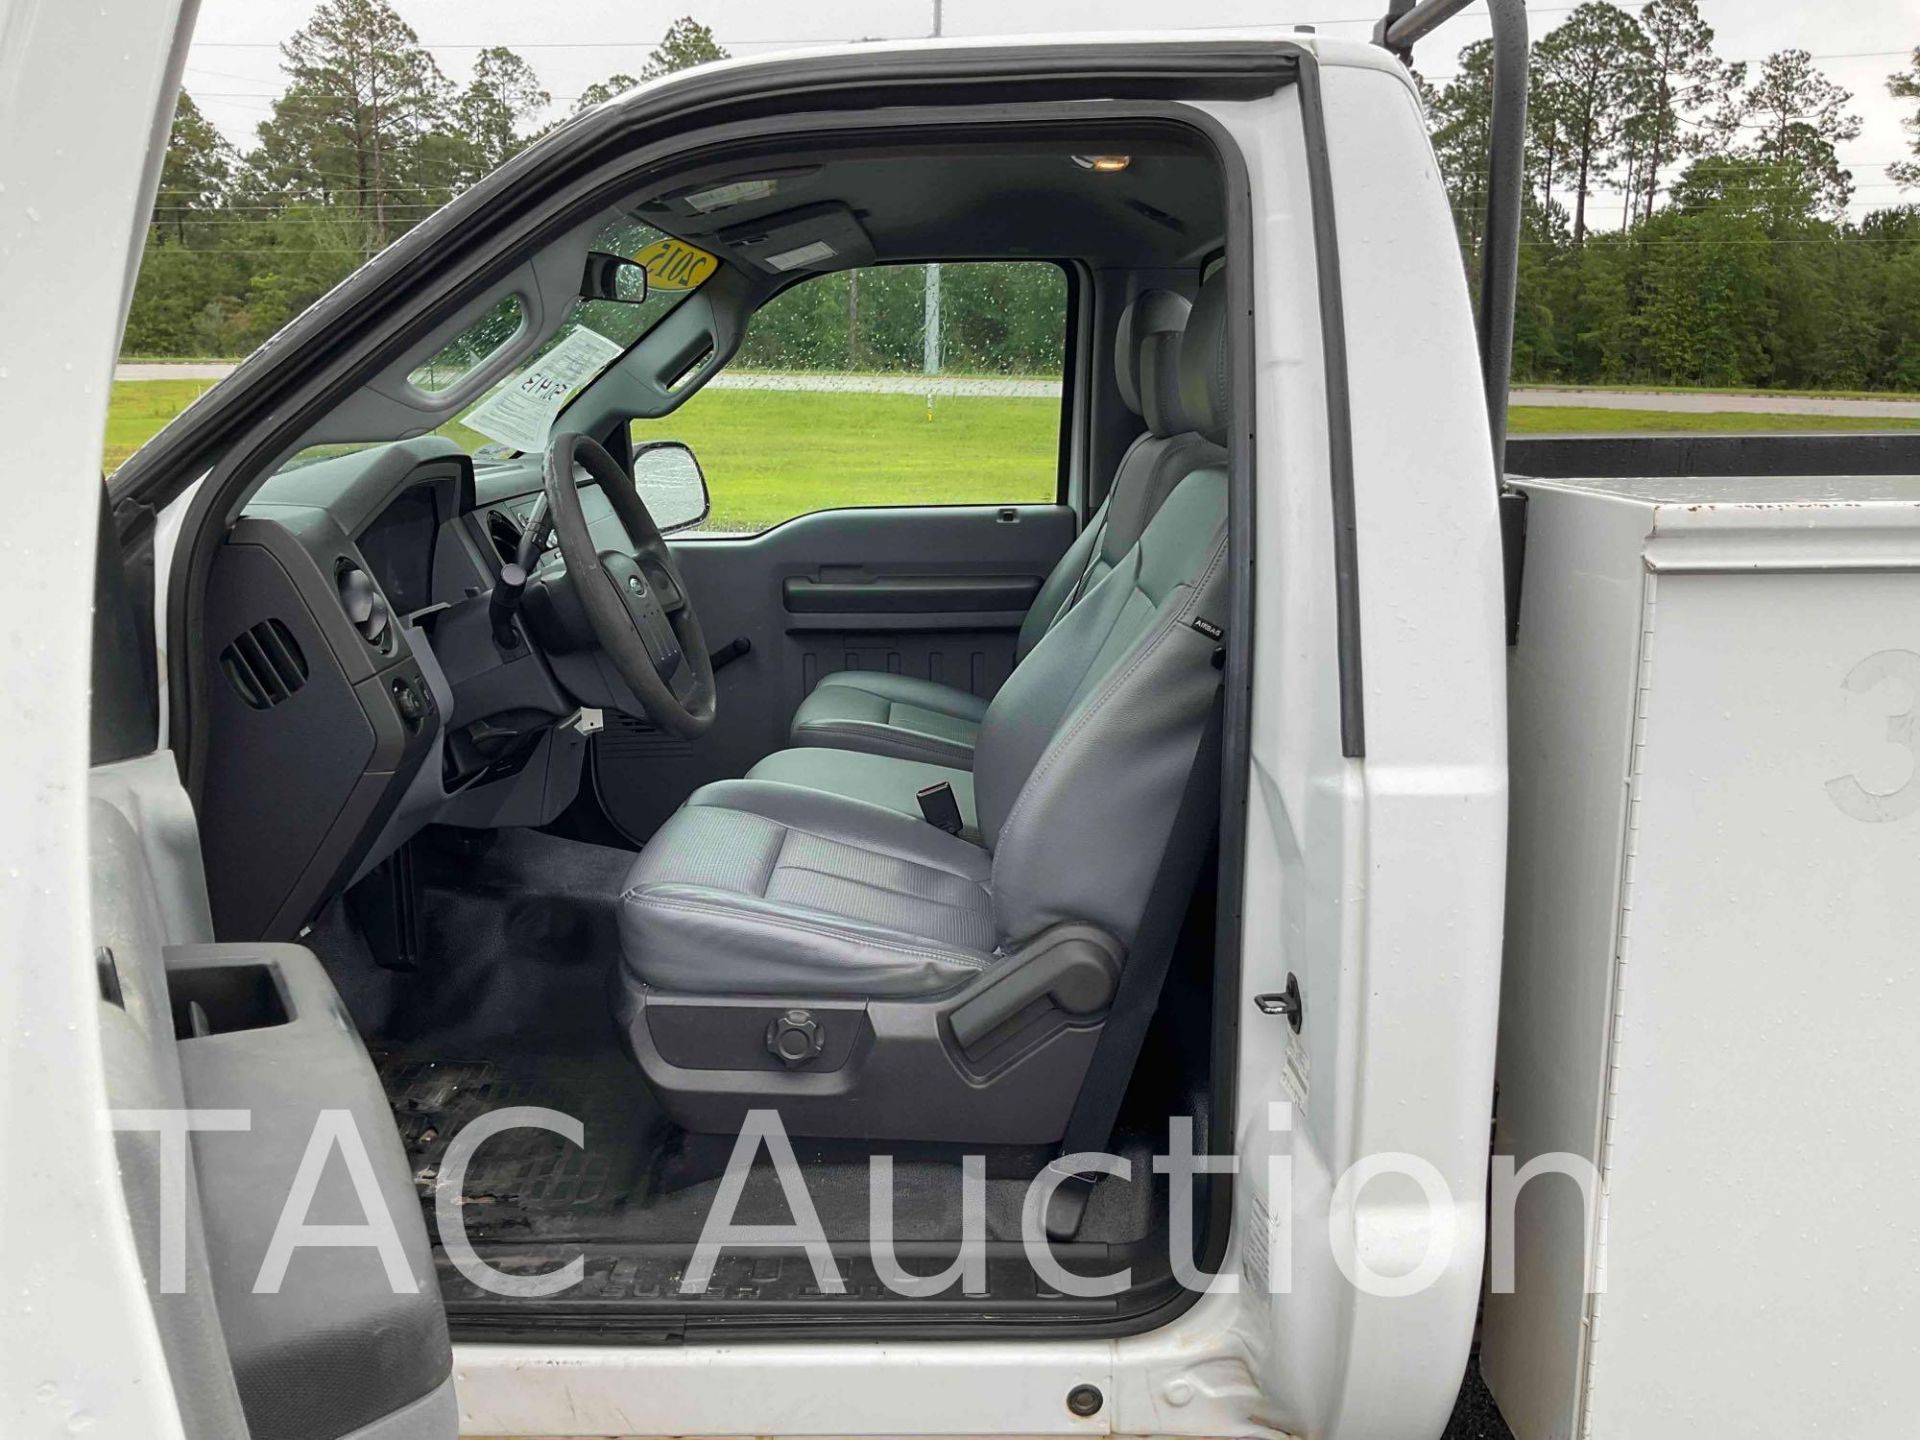 2015 Ford F250 Super Duty Service Truck - Image 10 of 50